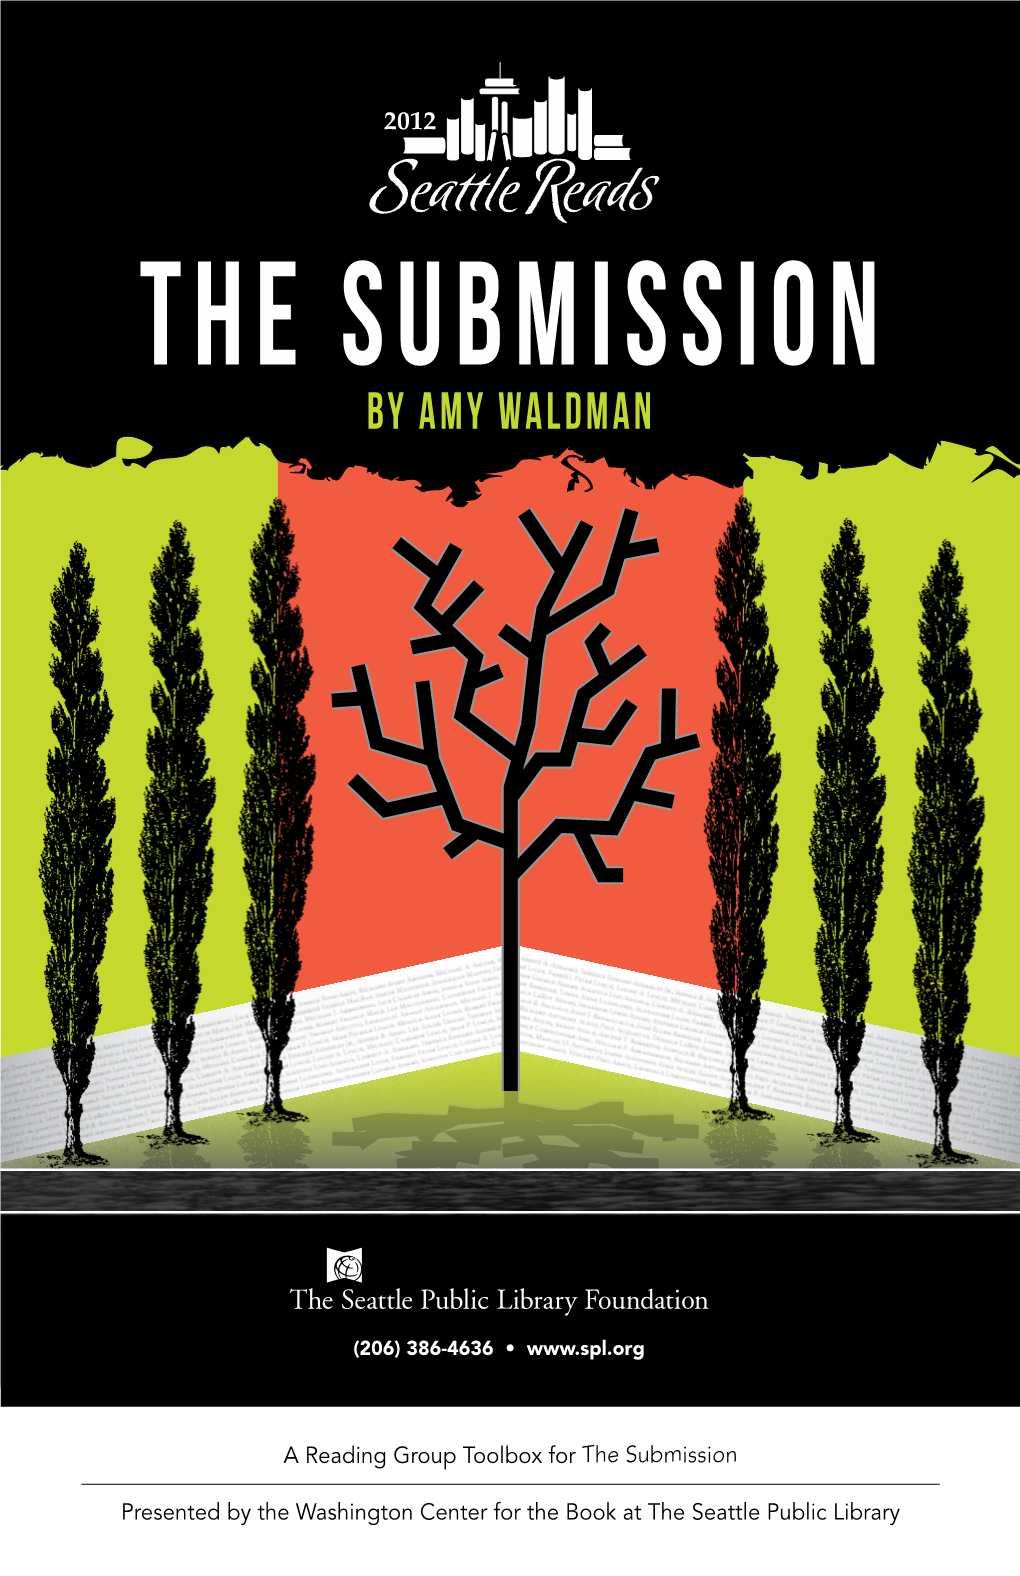 THE SUBMISSION by AMY WALDMAN